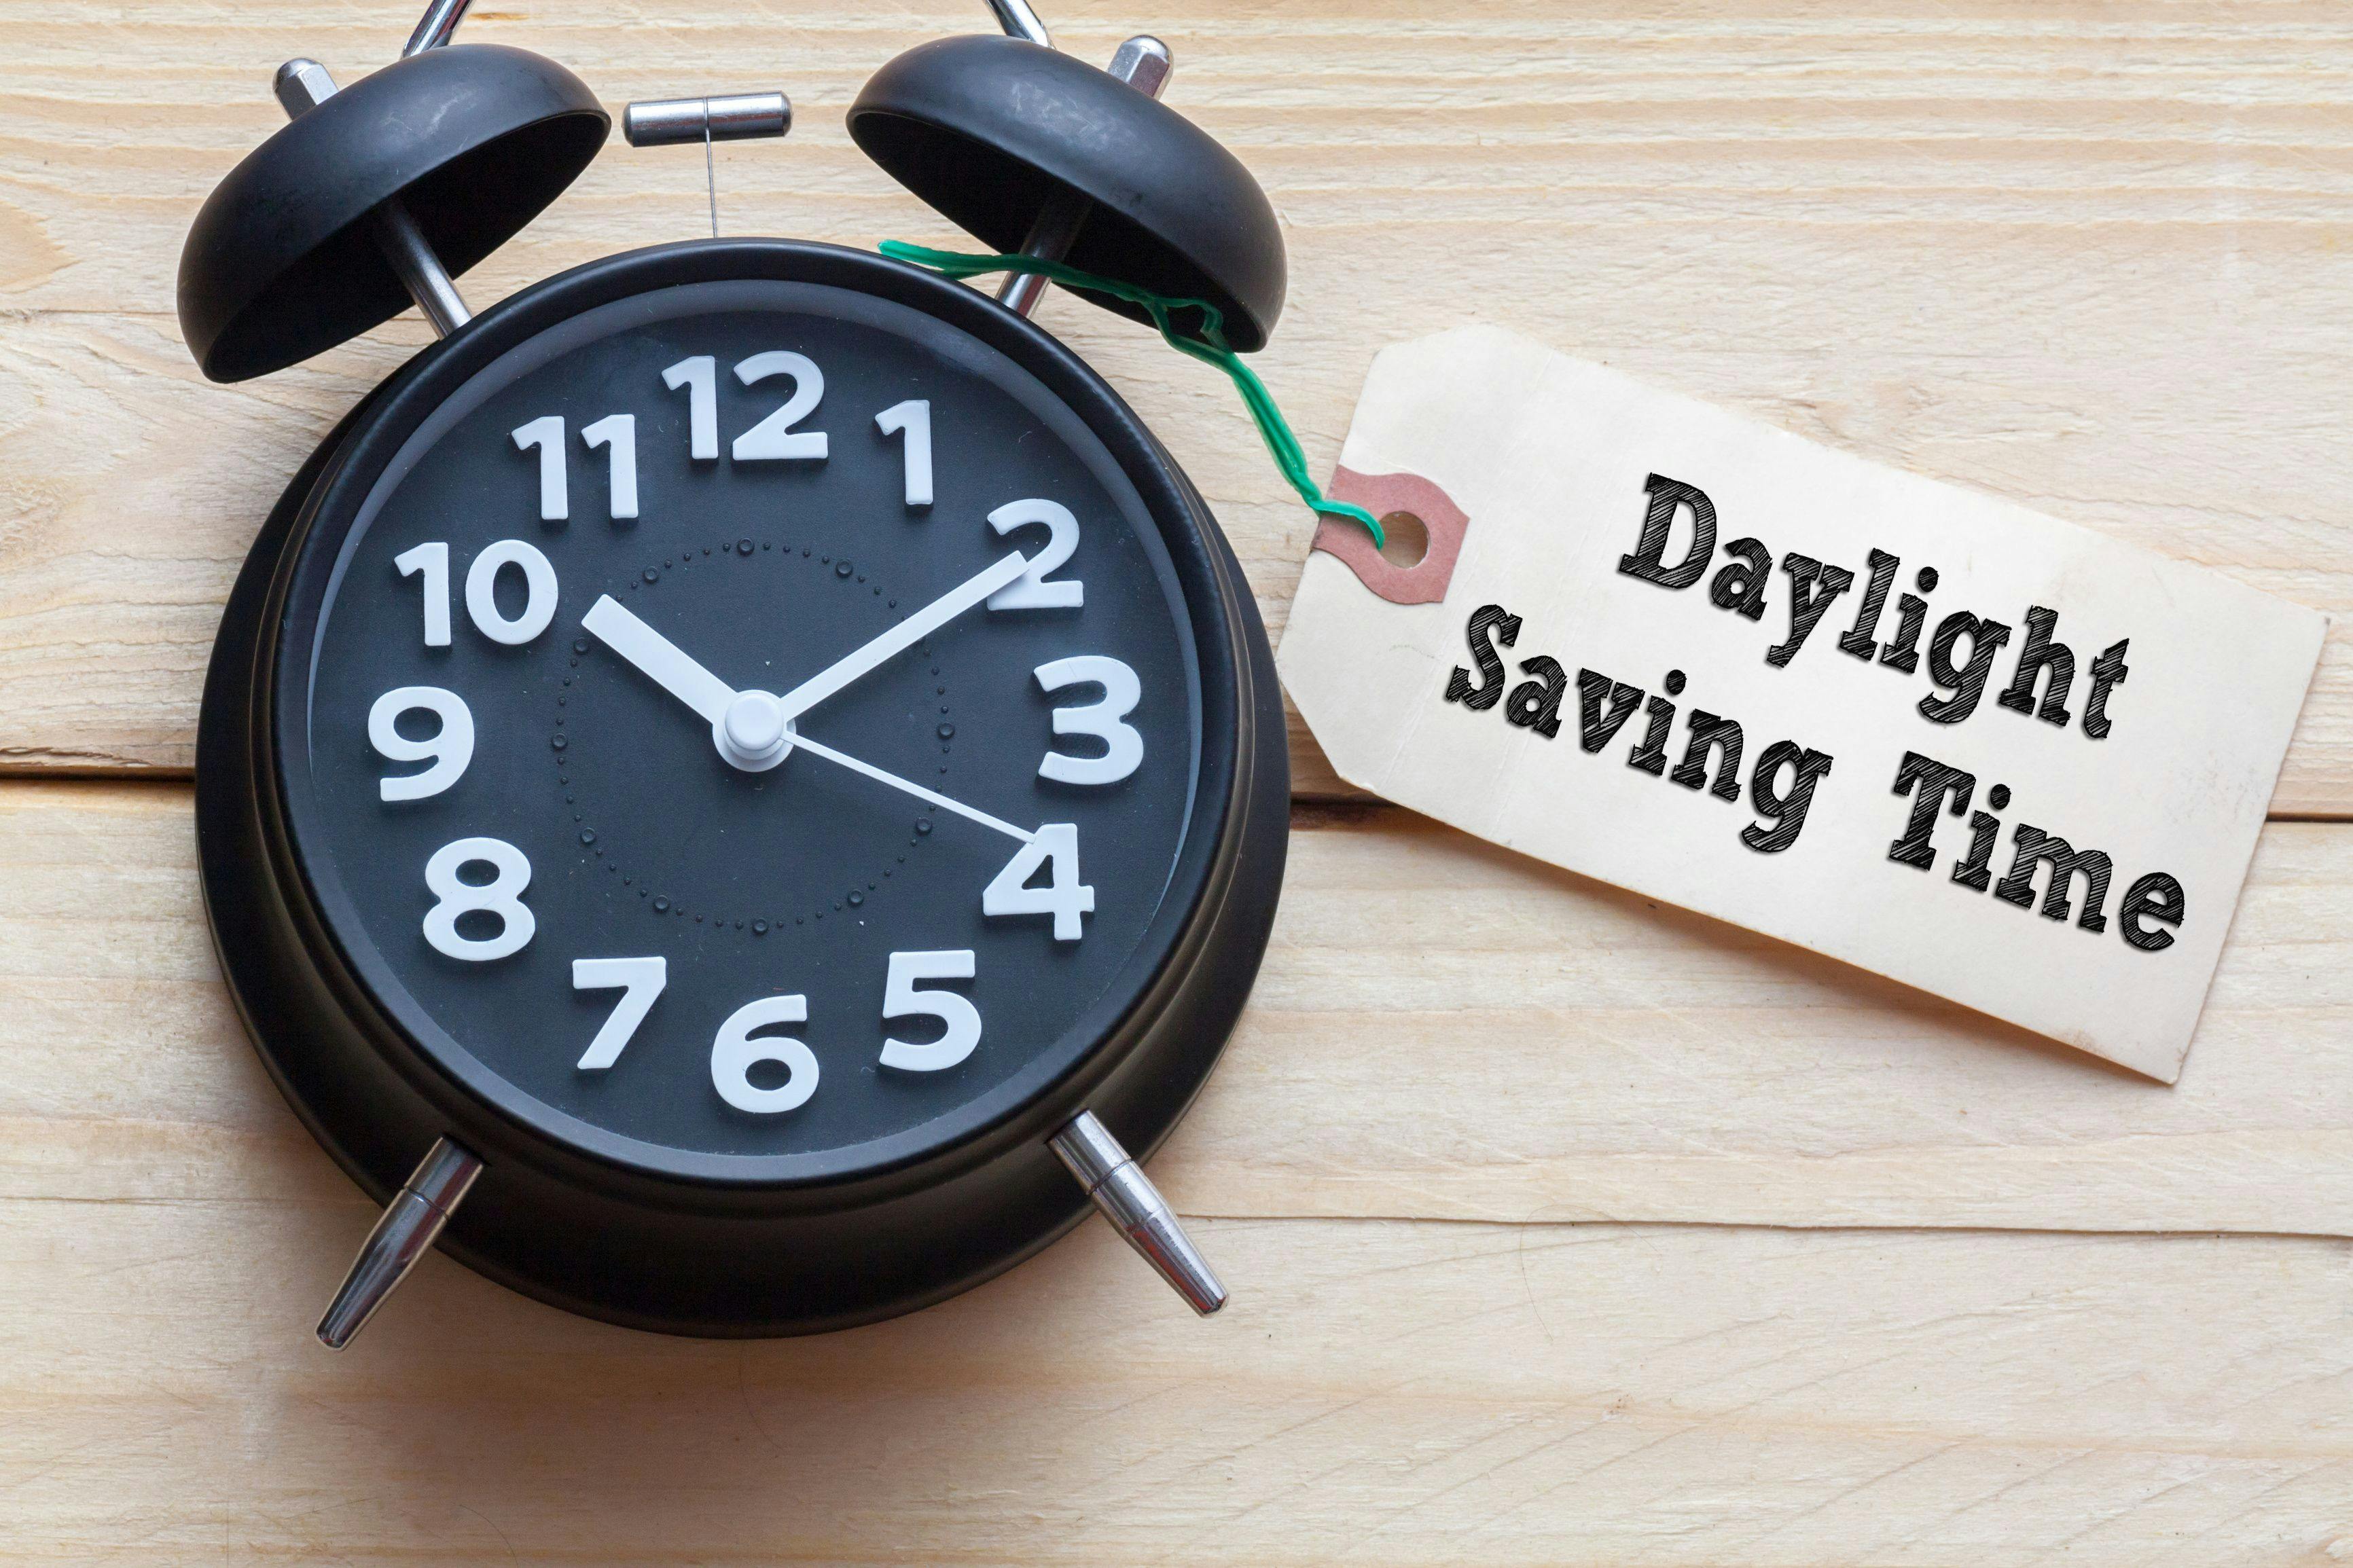 Daylight Savings linked to increased medical errors